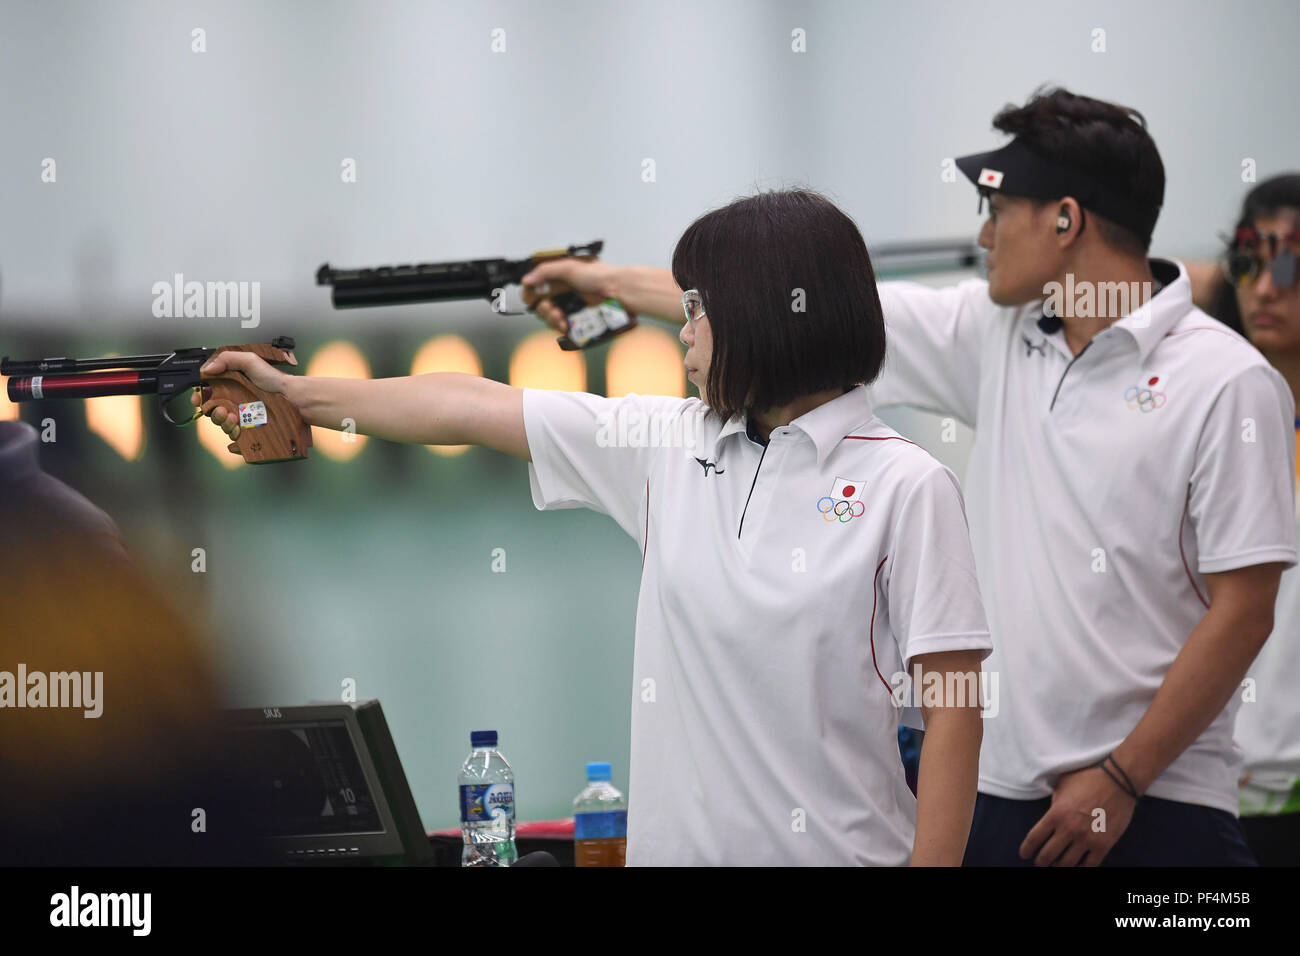 Palembang. 19th Aug, 2018. Sato Akiko (L) and Matsuda Tomoyuki of Japan compete during the 10m Air Pistol Mixed Team Qualification at the 18th Asian Games in Palembang, Indonesia Aug. 19, 2018. Credit: Liu Ailun/Xinhua/Alamy Live News Stock Photo